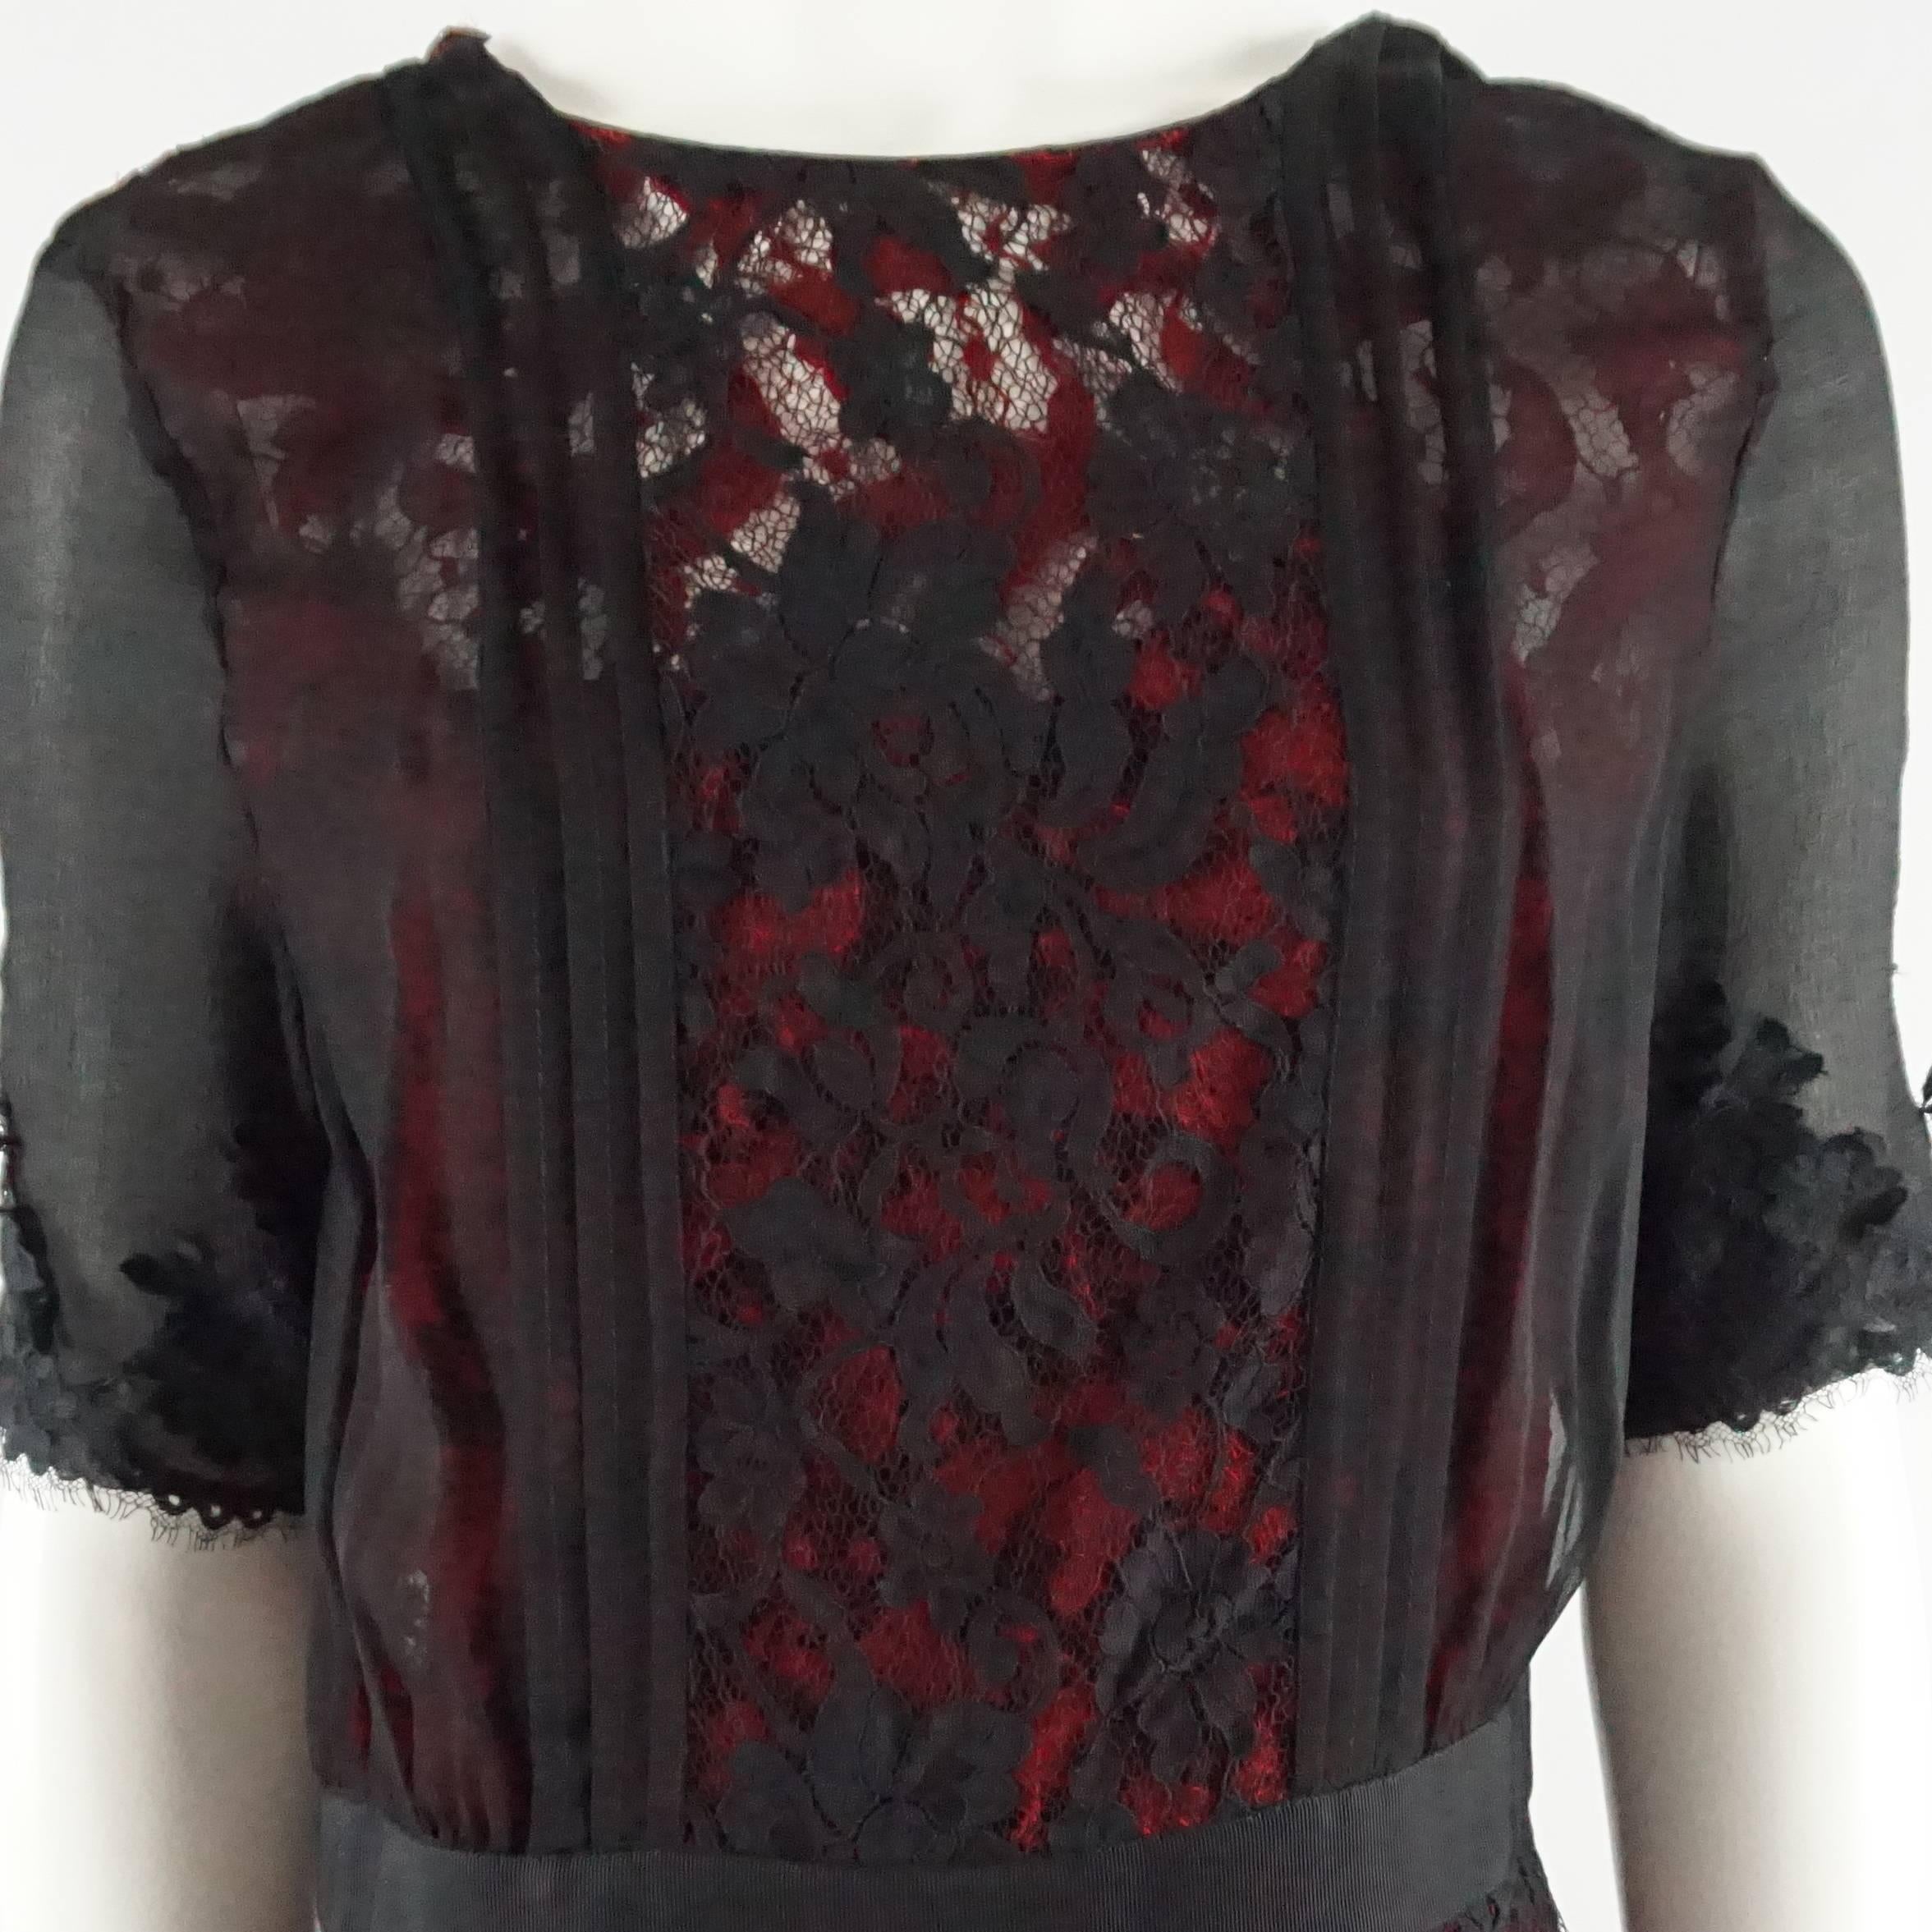 Oscar de la Renta Black and Red Silk Chiffon Dress with Lace - 10 - NWT In New Condition For Sale In West Palm Beach, FL